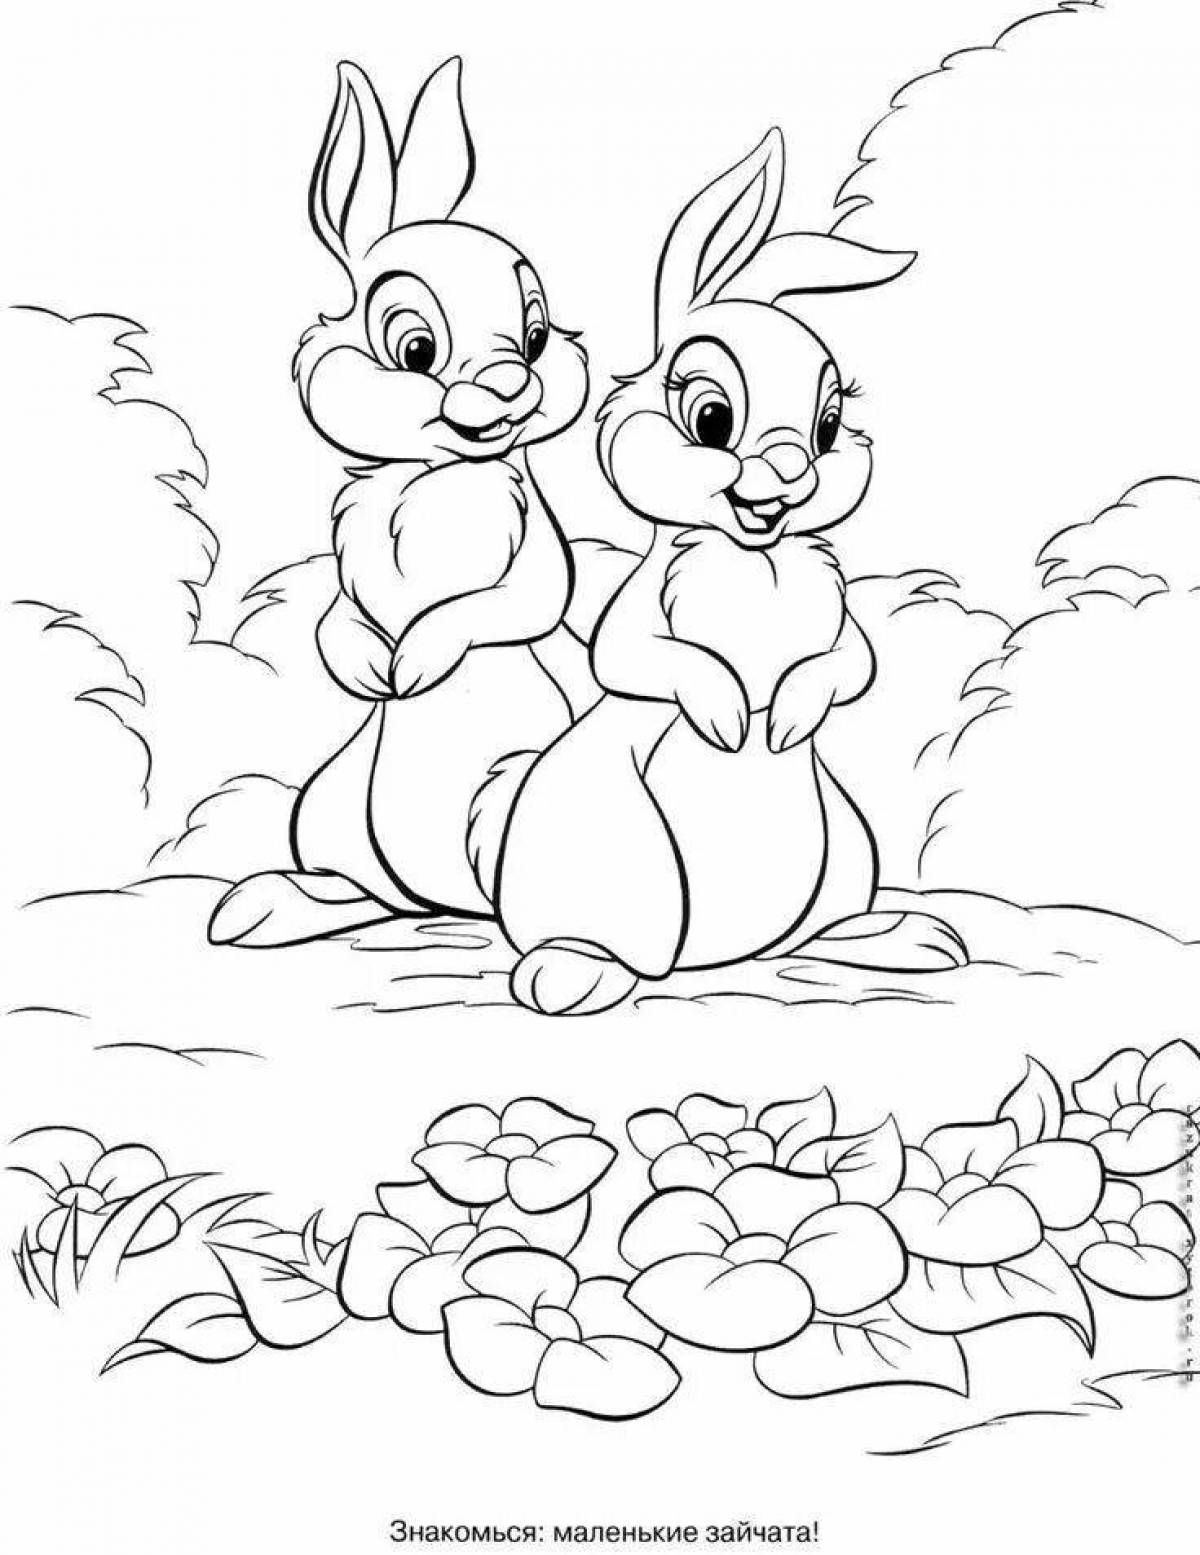 A fascinating coloring picture of a rabbit